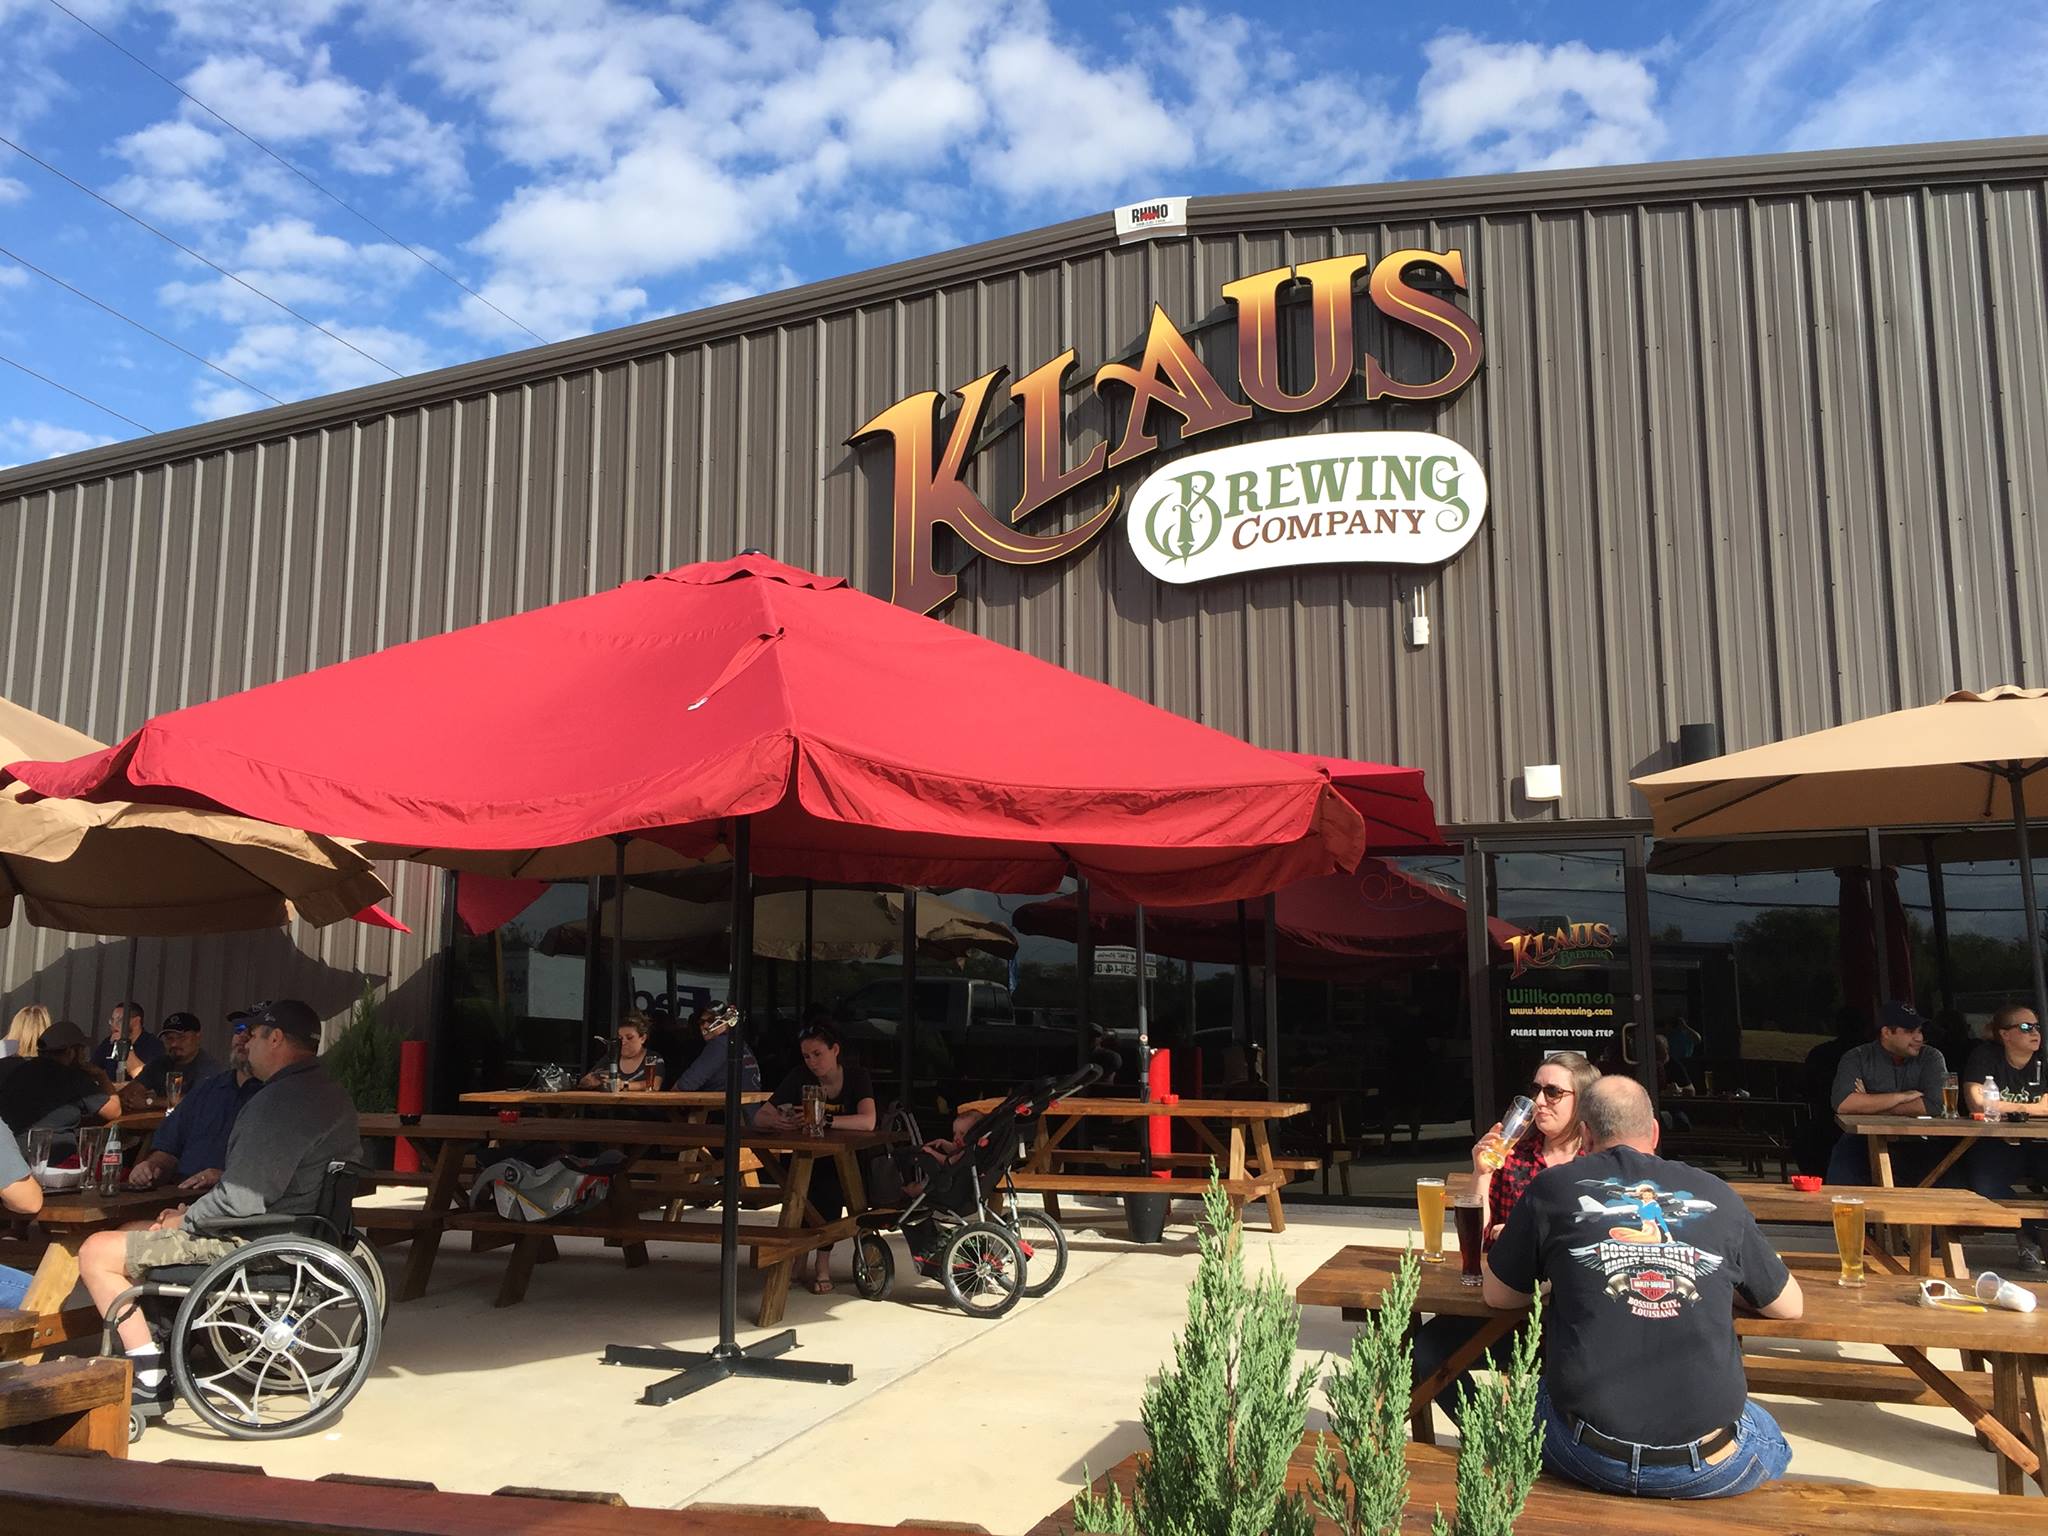 ACLS Houston - Klaus Brewery Event